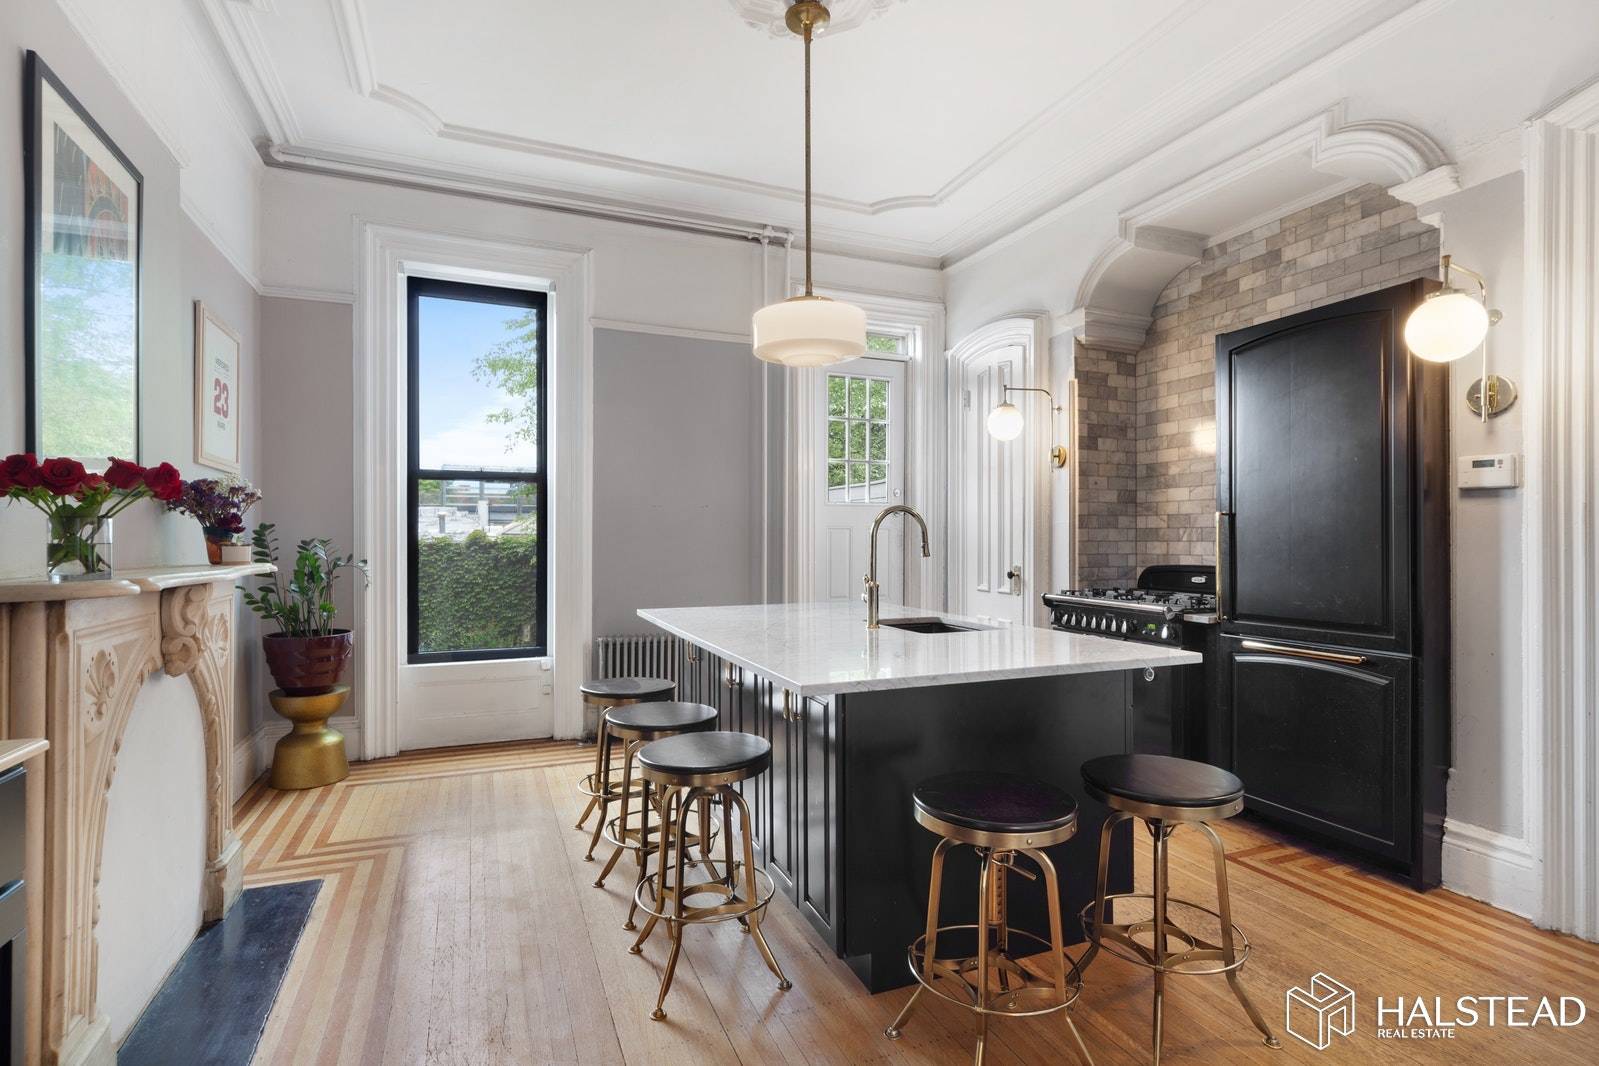 Back on the market ! Located on a landmarked block in exciting Crown Heights, this four story two family Italianate brownstone will capture your heart.